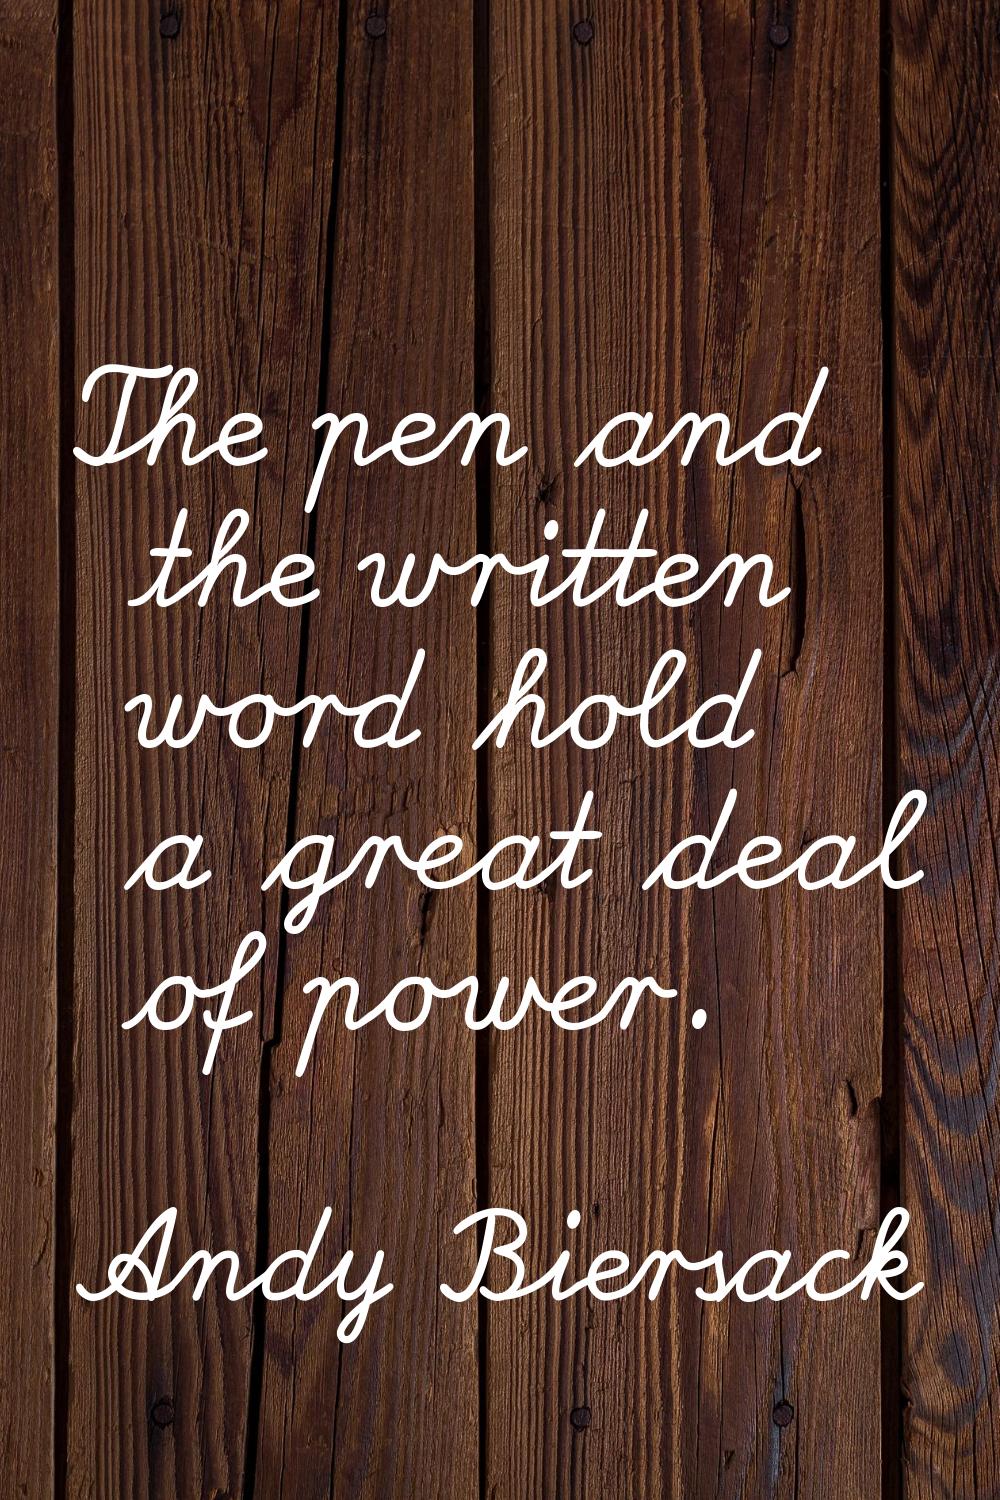 The pen and the written word hold a great deal of power.